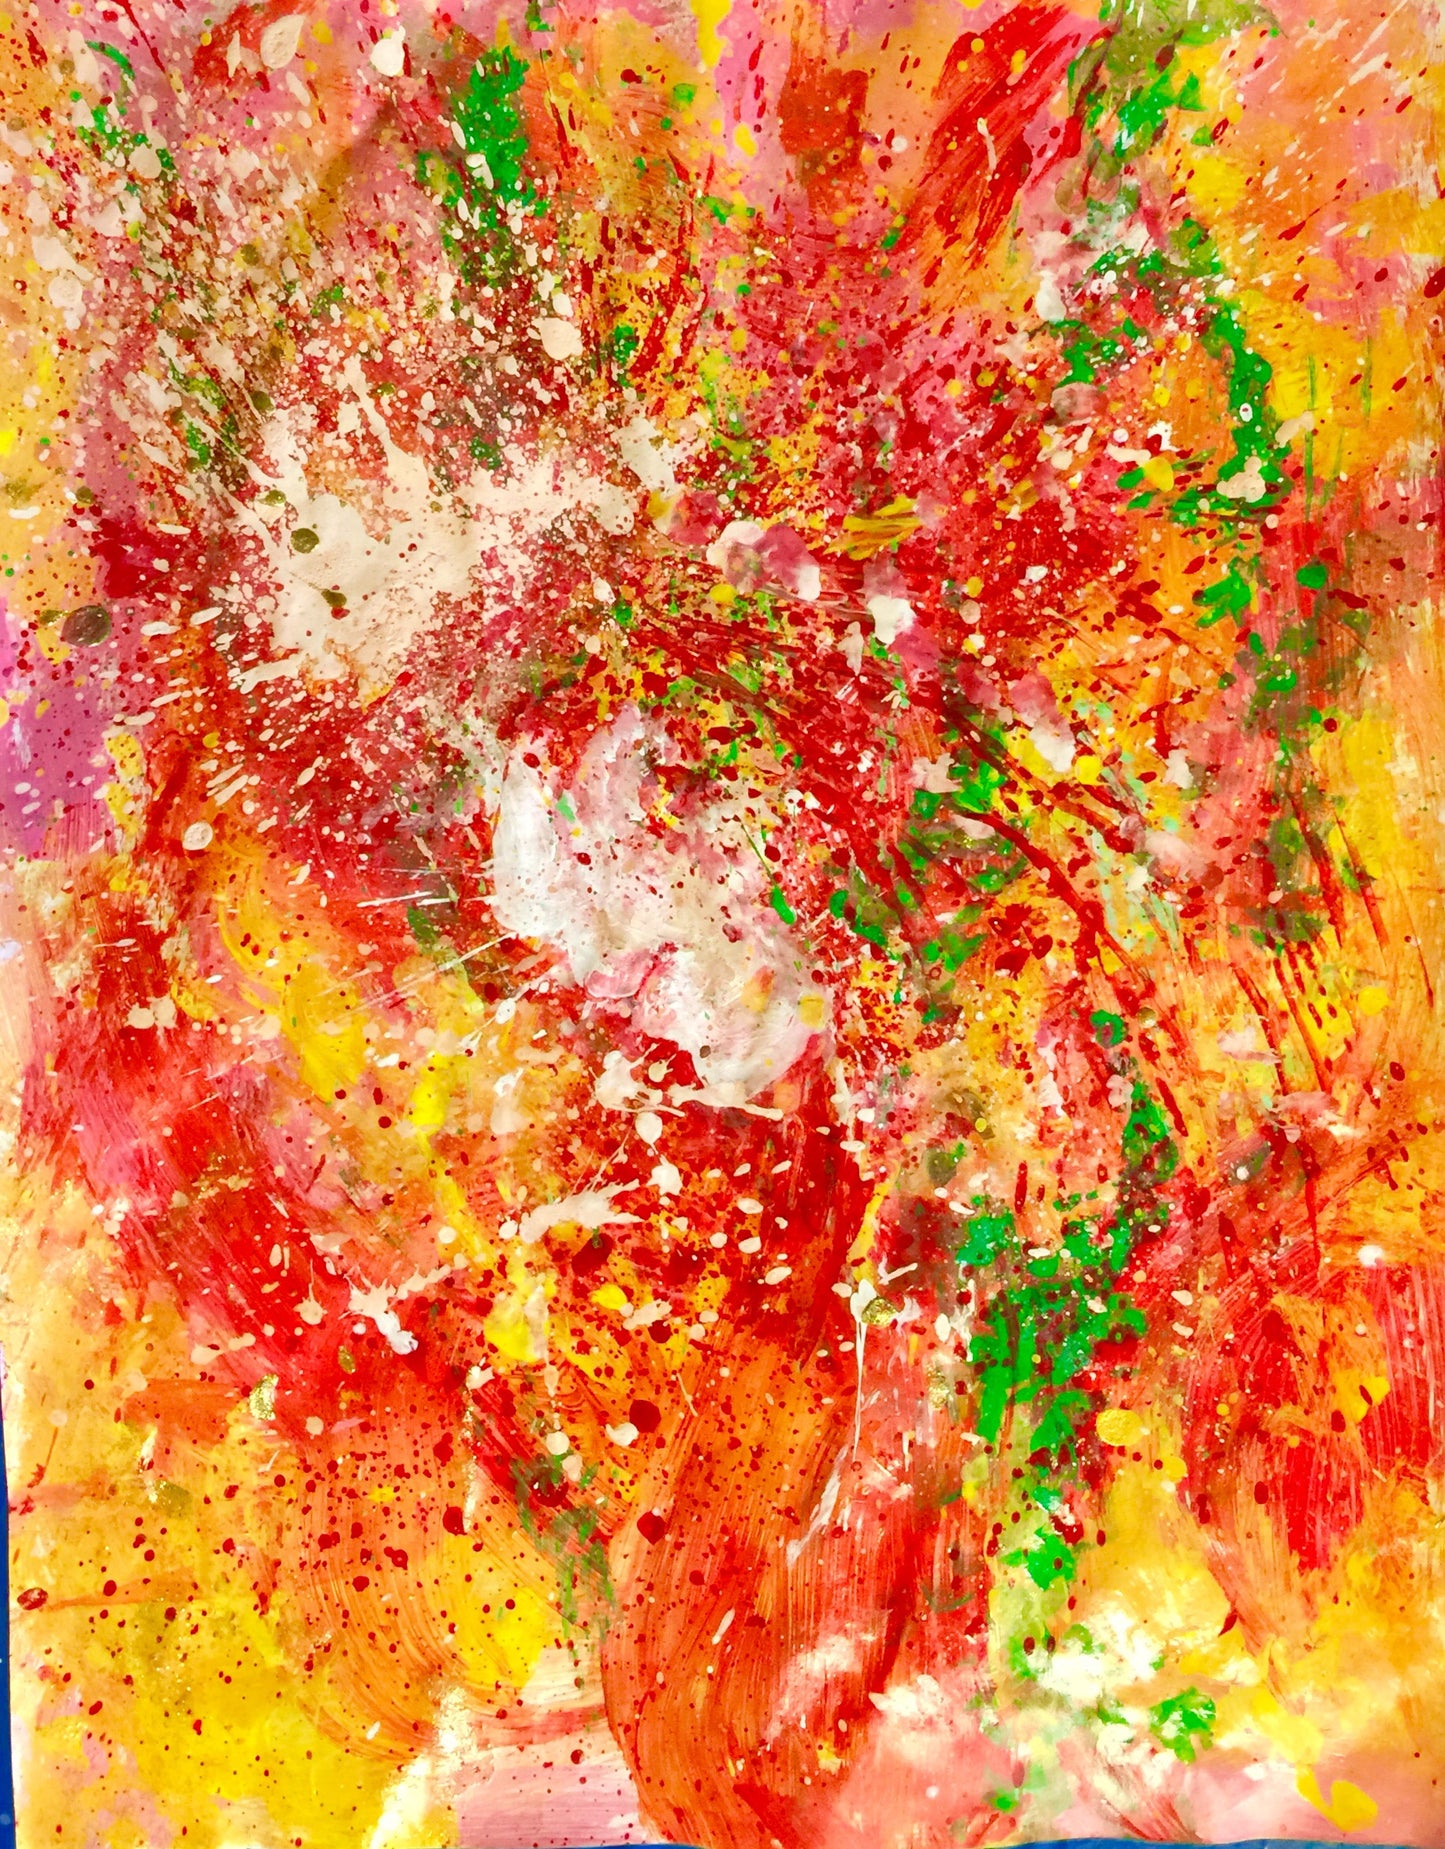 Fiery Vase - Sonarta.com Fiery Vase is gorgeous. It colors spark as you move around it. It feels chic.  This is an Acrylic on Paper painting by Shahla Rahimi Reynolds.  Fiery Vase is 24" H X 19" W.